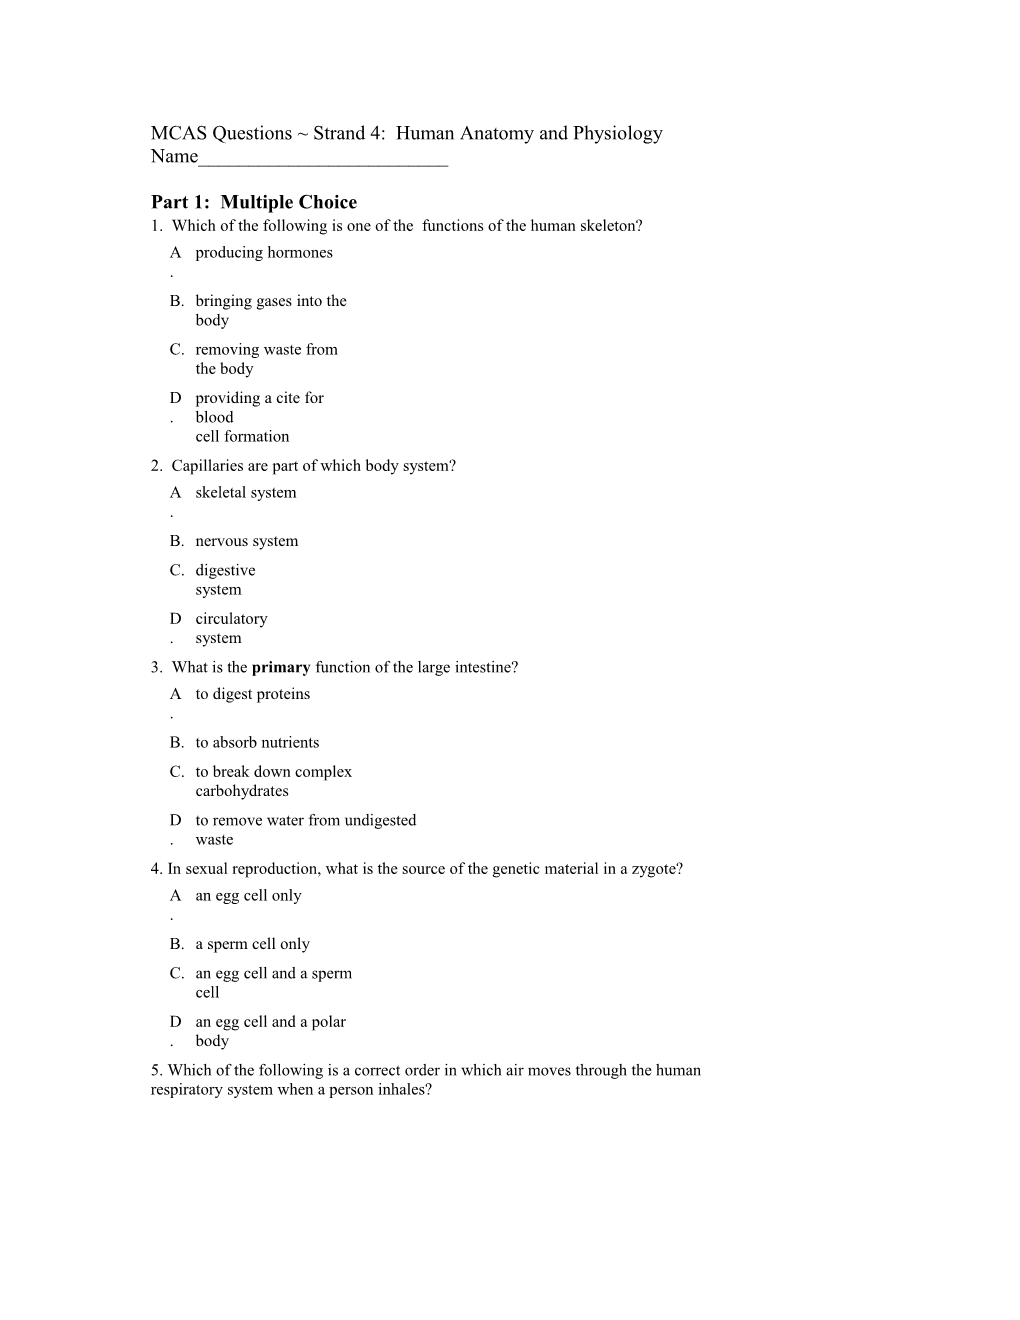 MCAS Questions Strand 4: Human Anatomy and Physiology